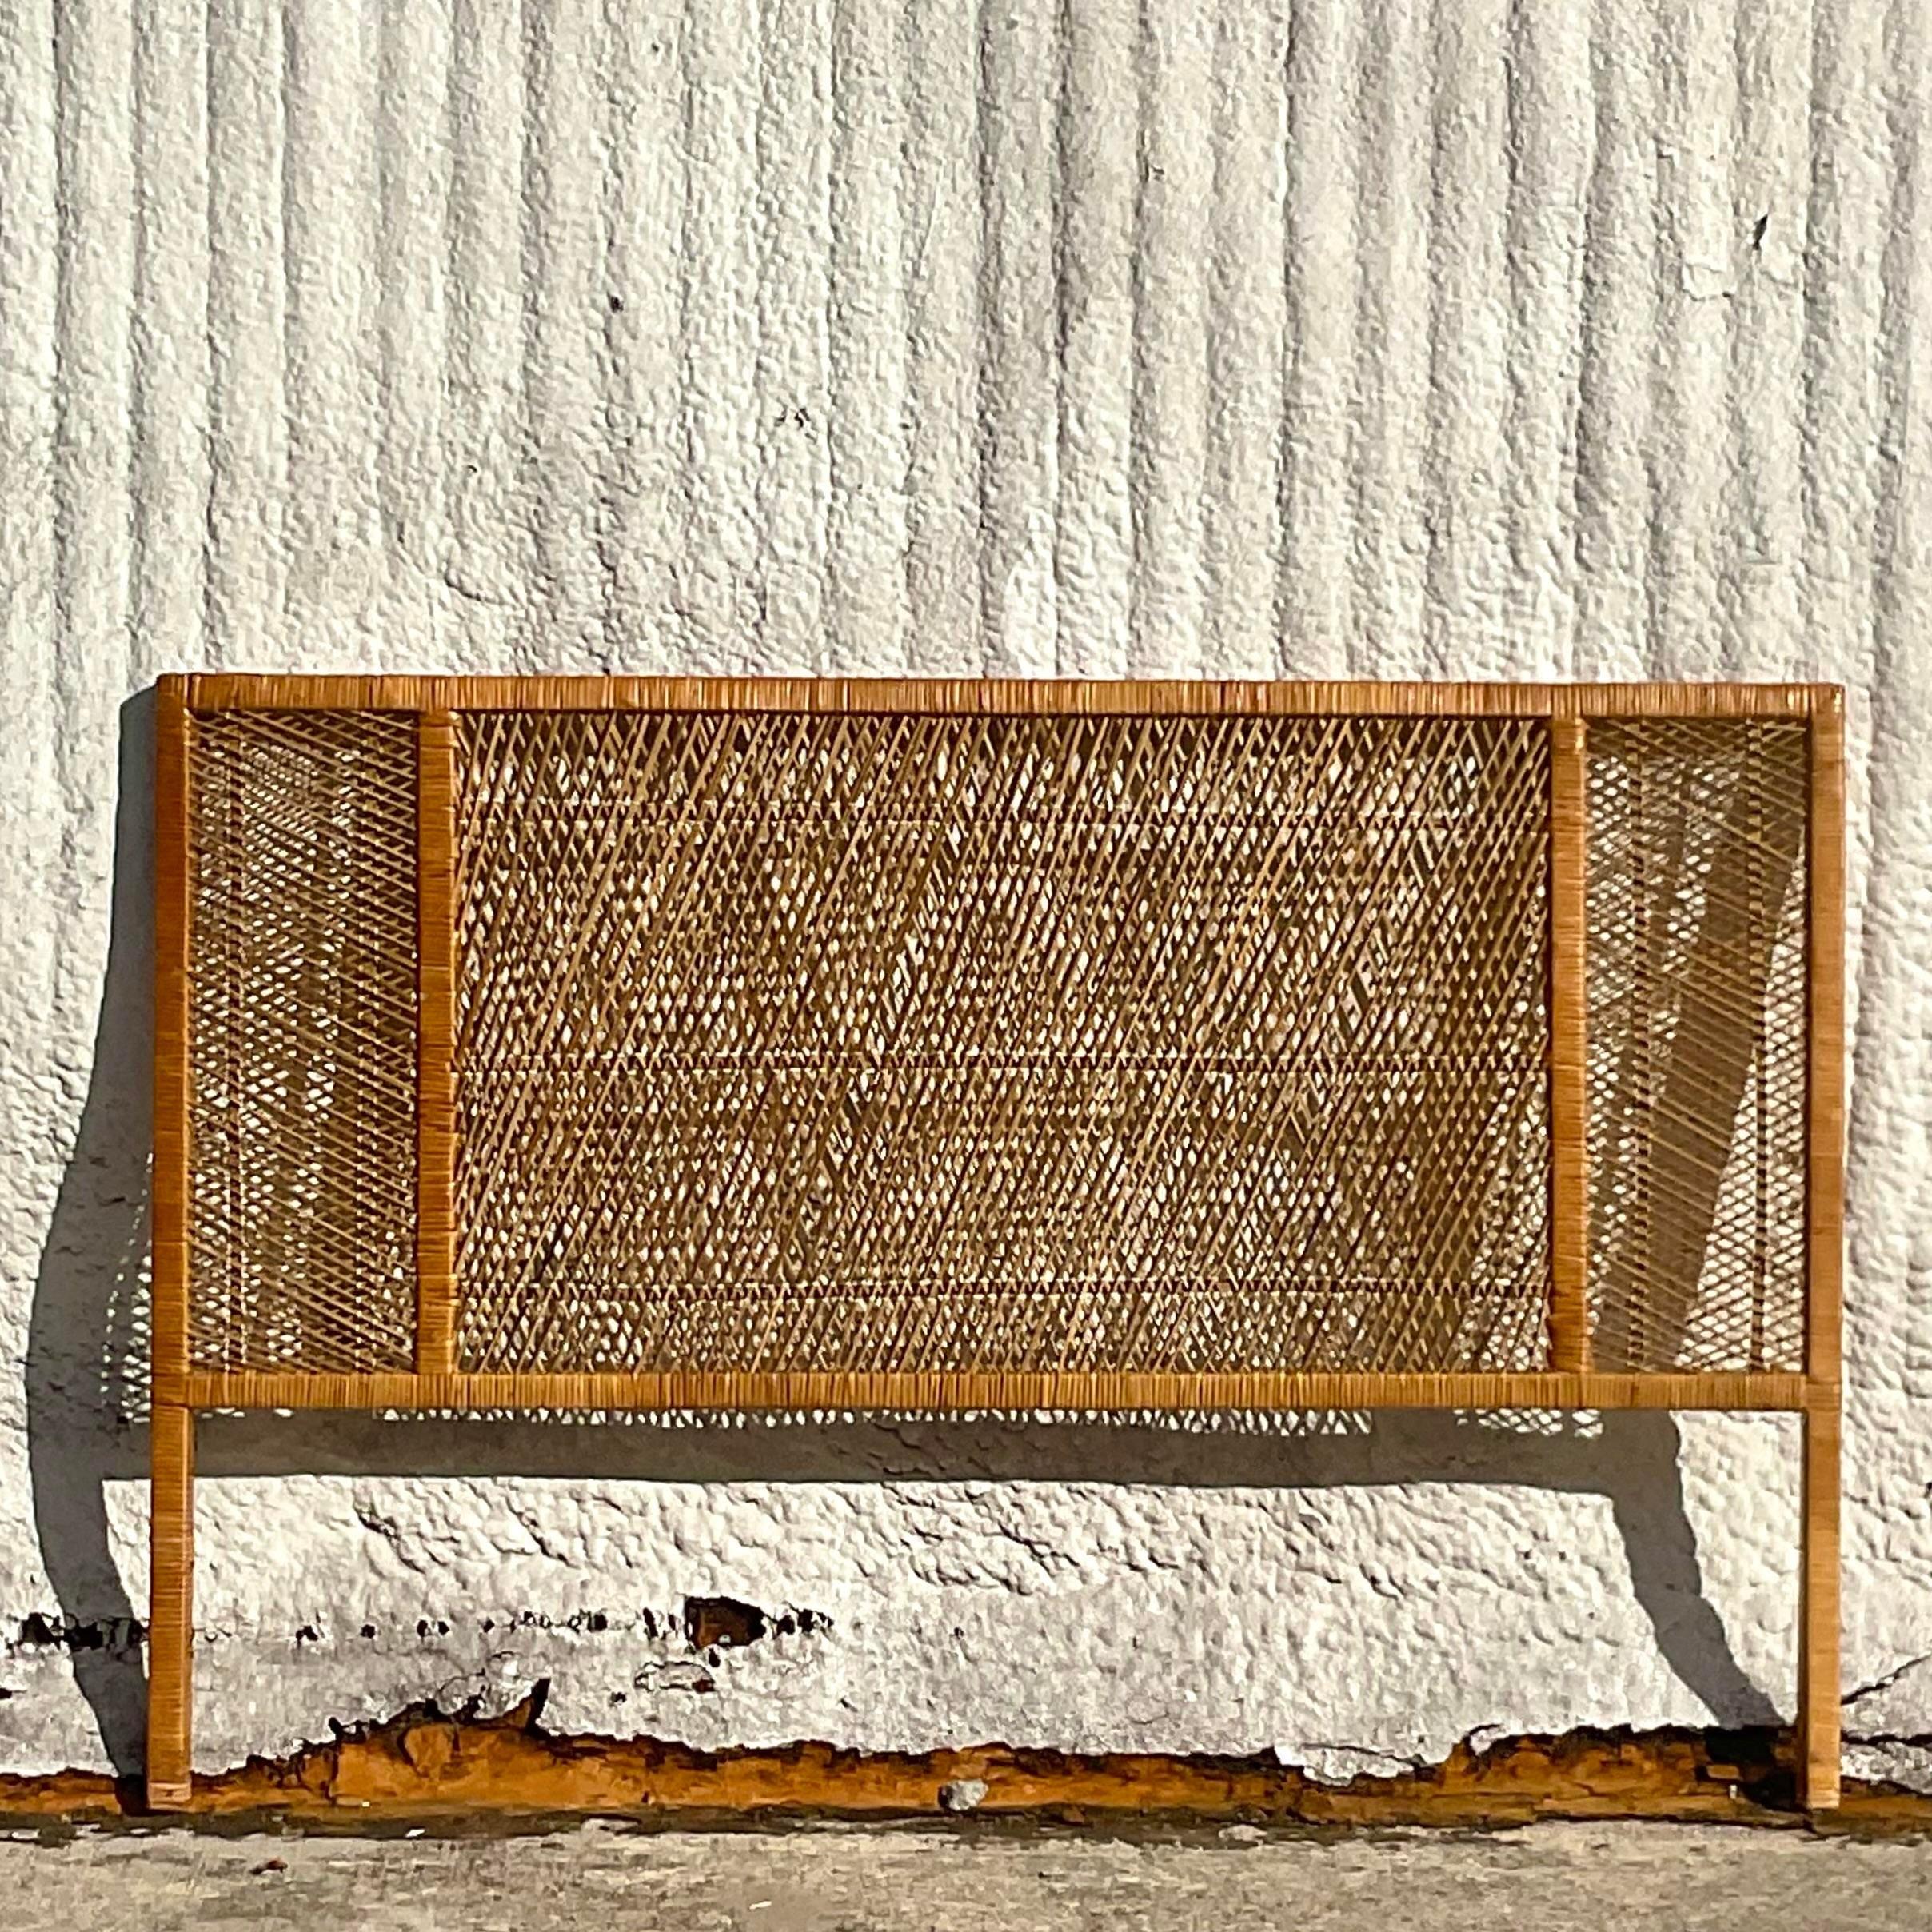 A fantastic vintage Coastal Queen headboard. Chic woven rattan in a clean and modern design. Acquired from a Palm Beach estate